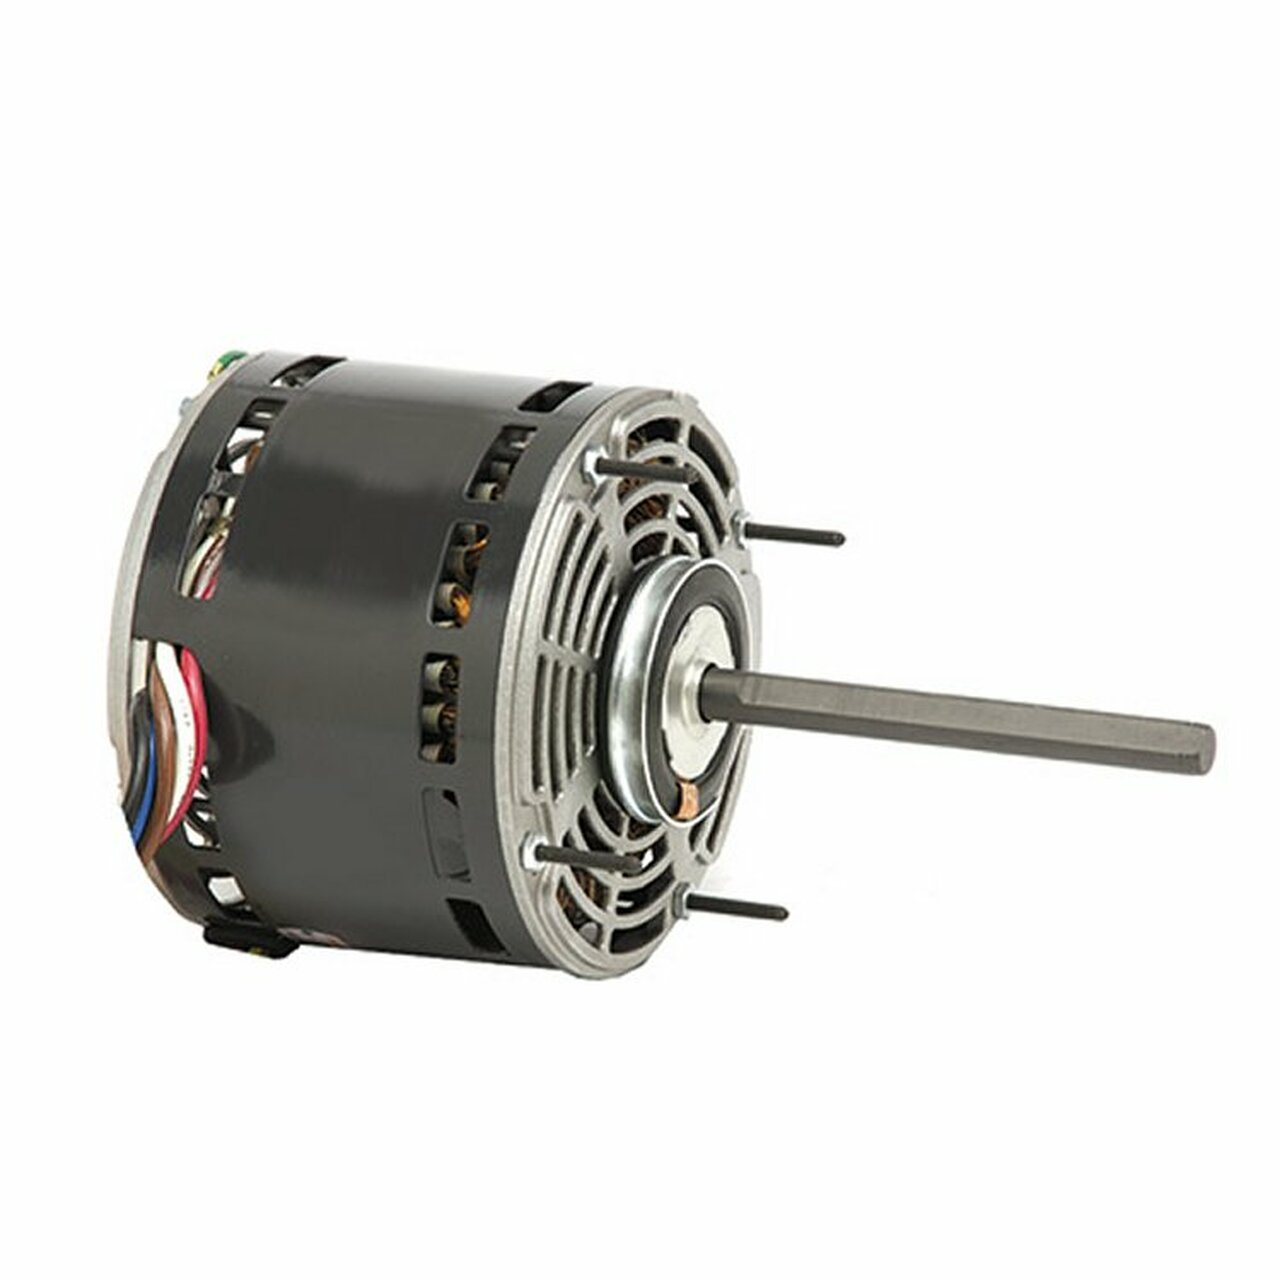 Replace For Nidec 3568 PSC Condenser Blower Motor